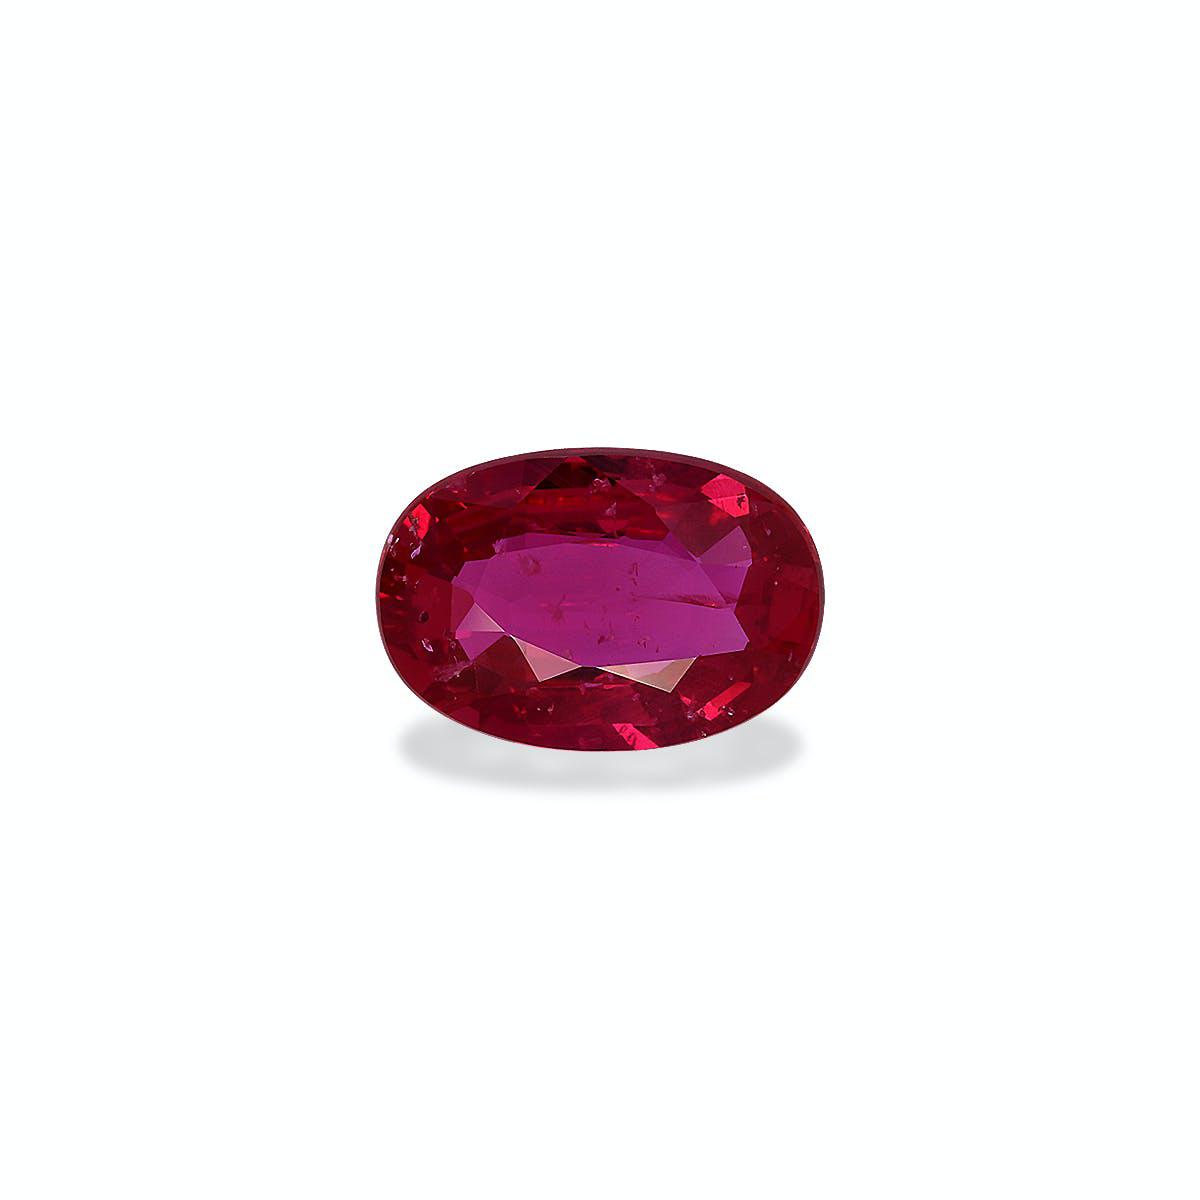 Picture of Mozambique Ruby 4.08ct (8N-01)